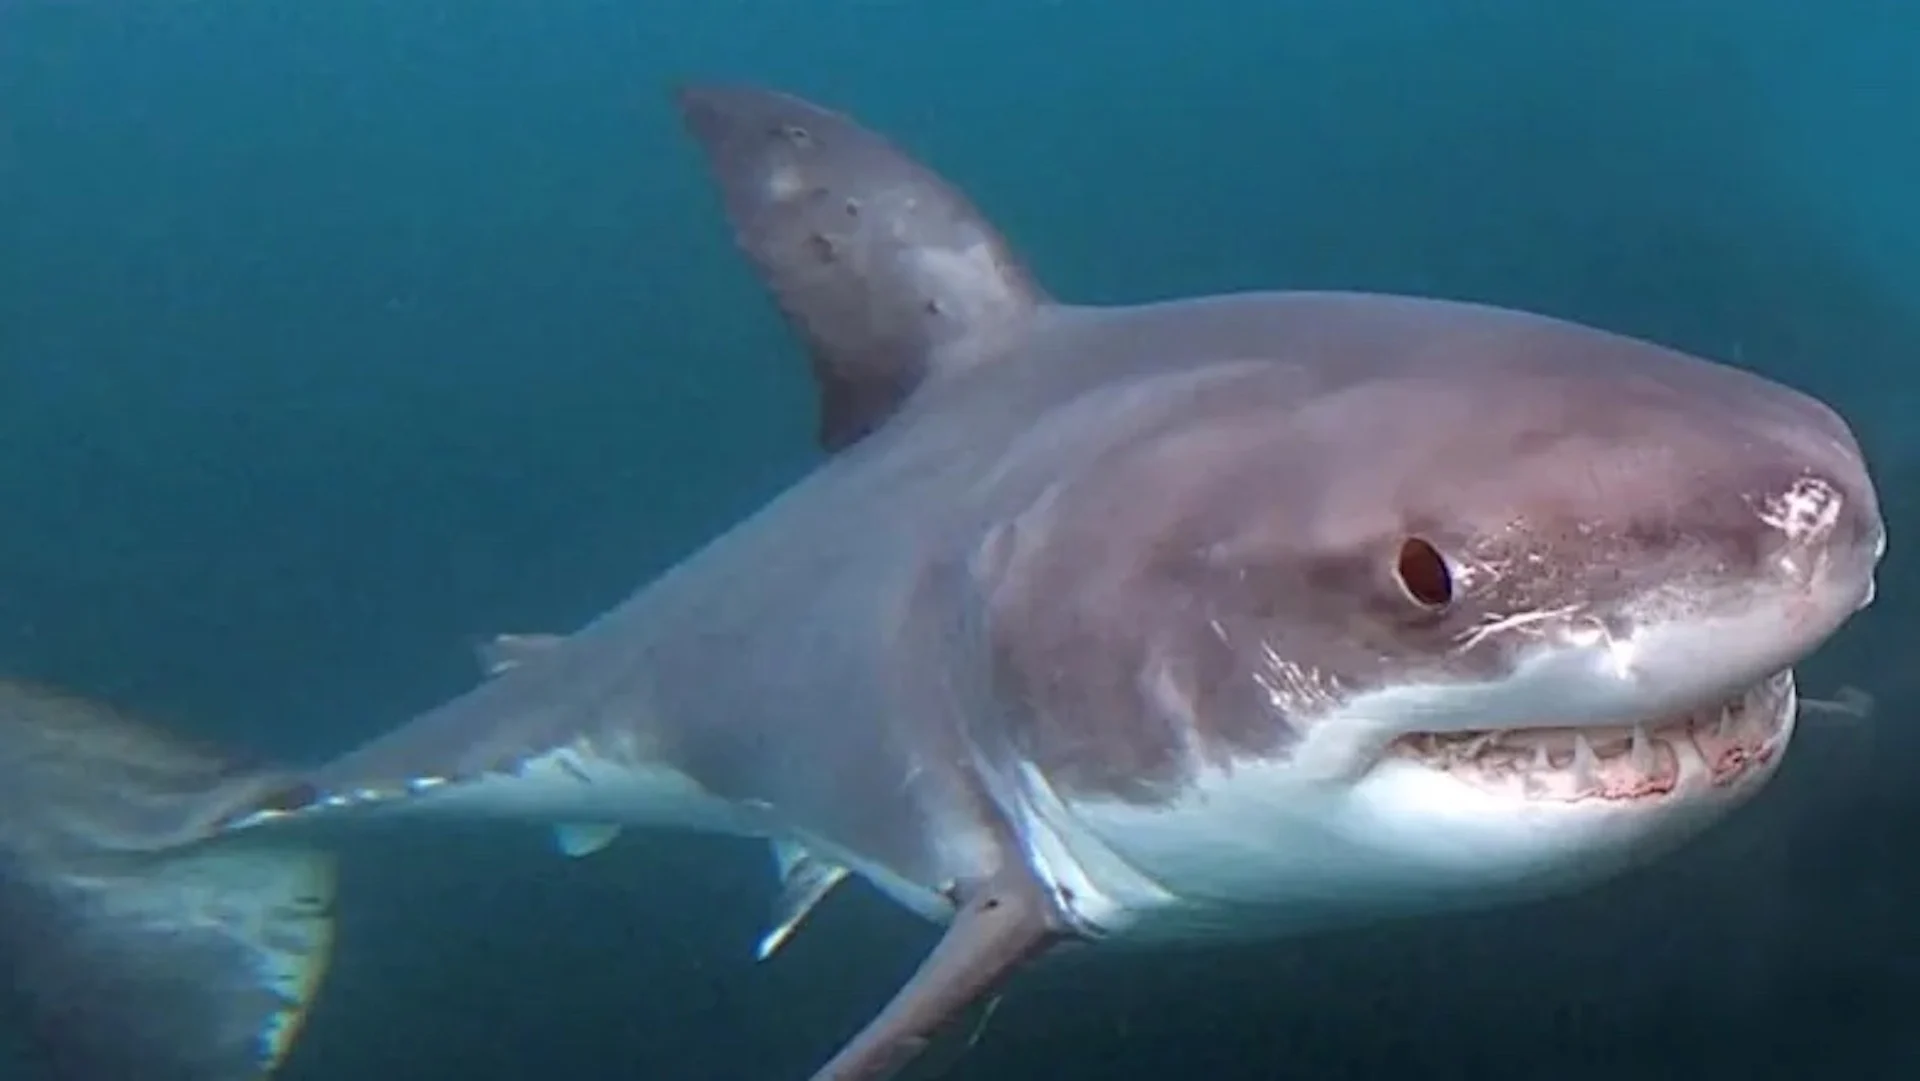 Cage diving with great white sharks coming to Nova Scotia's South Shore